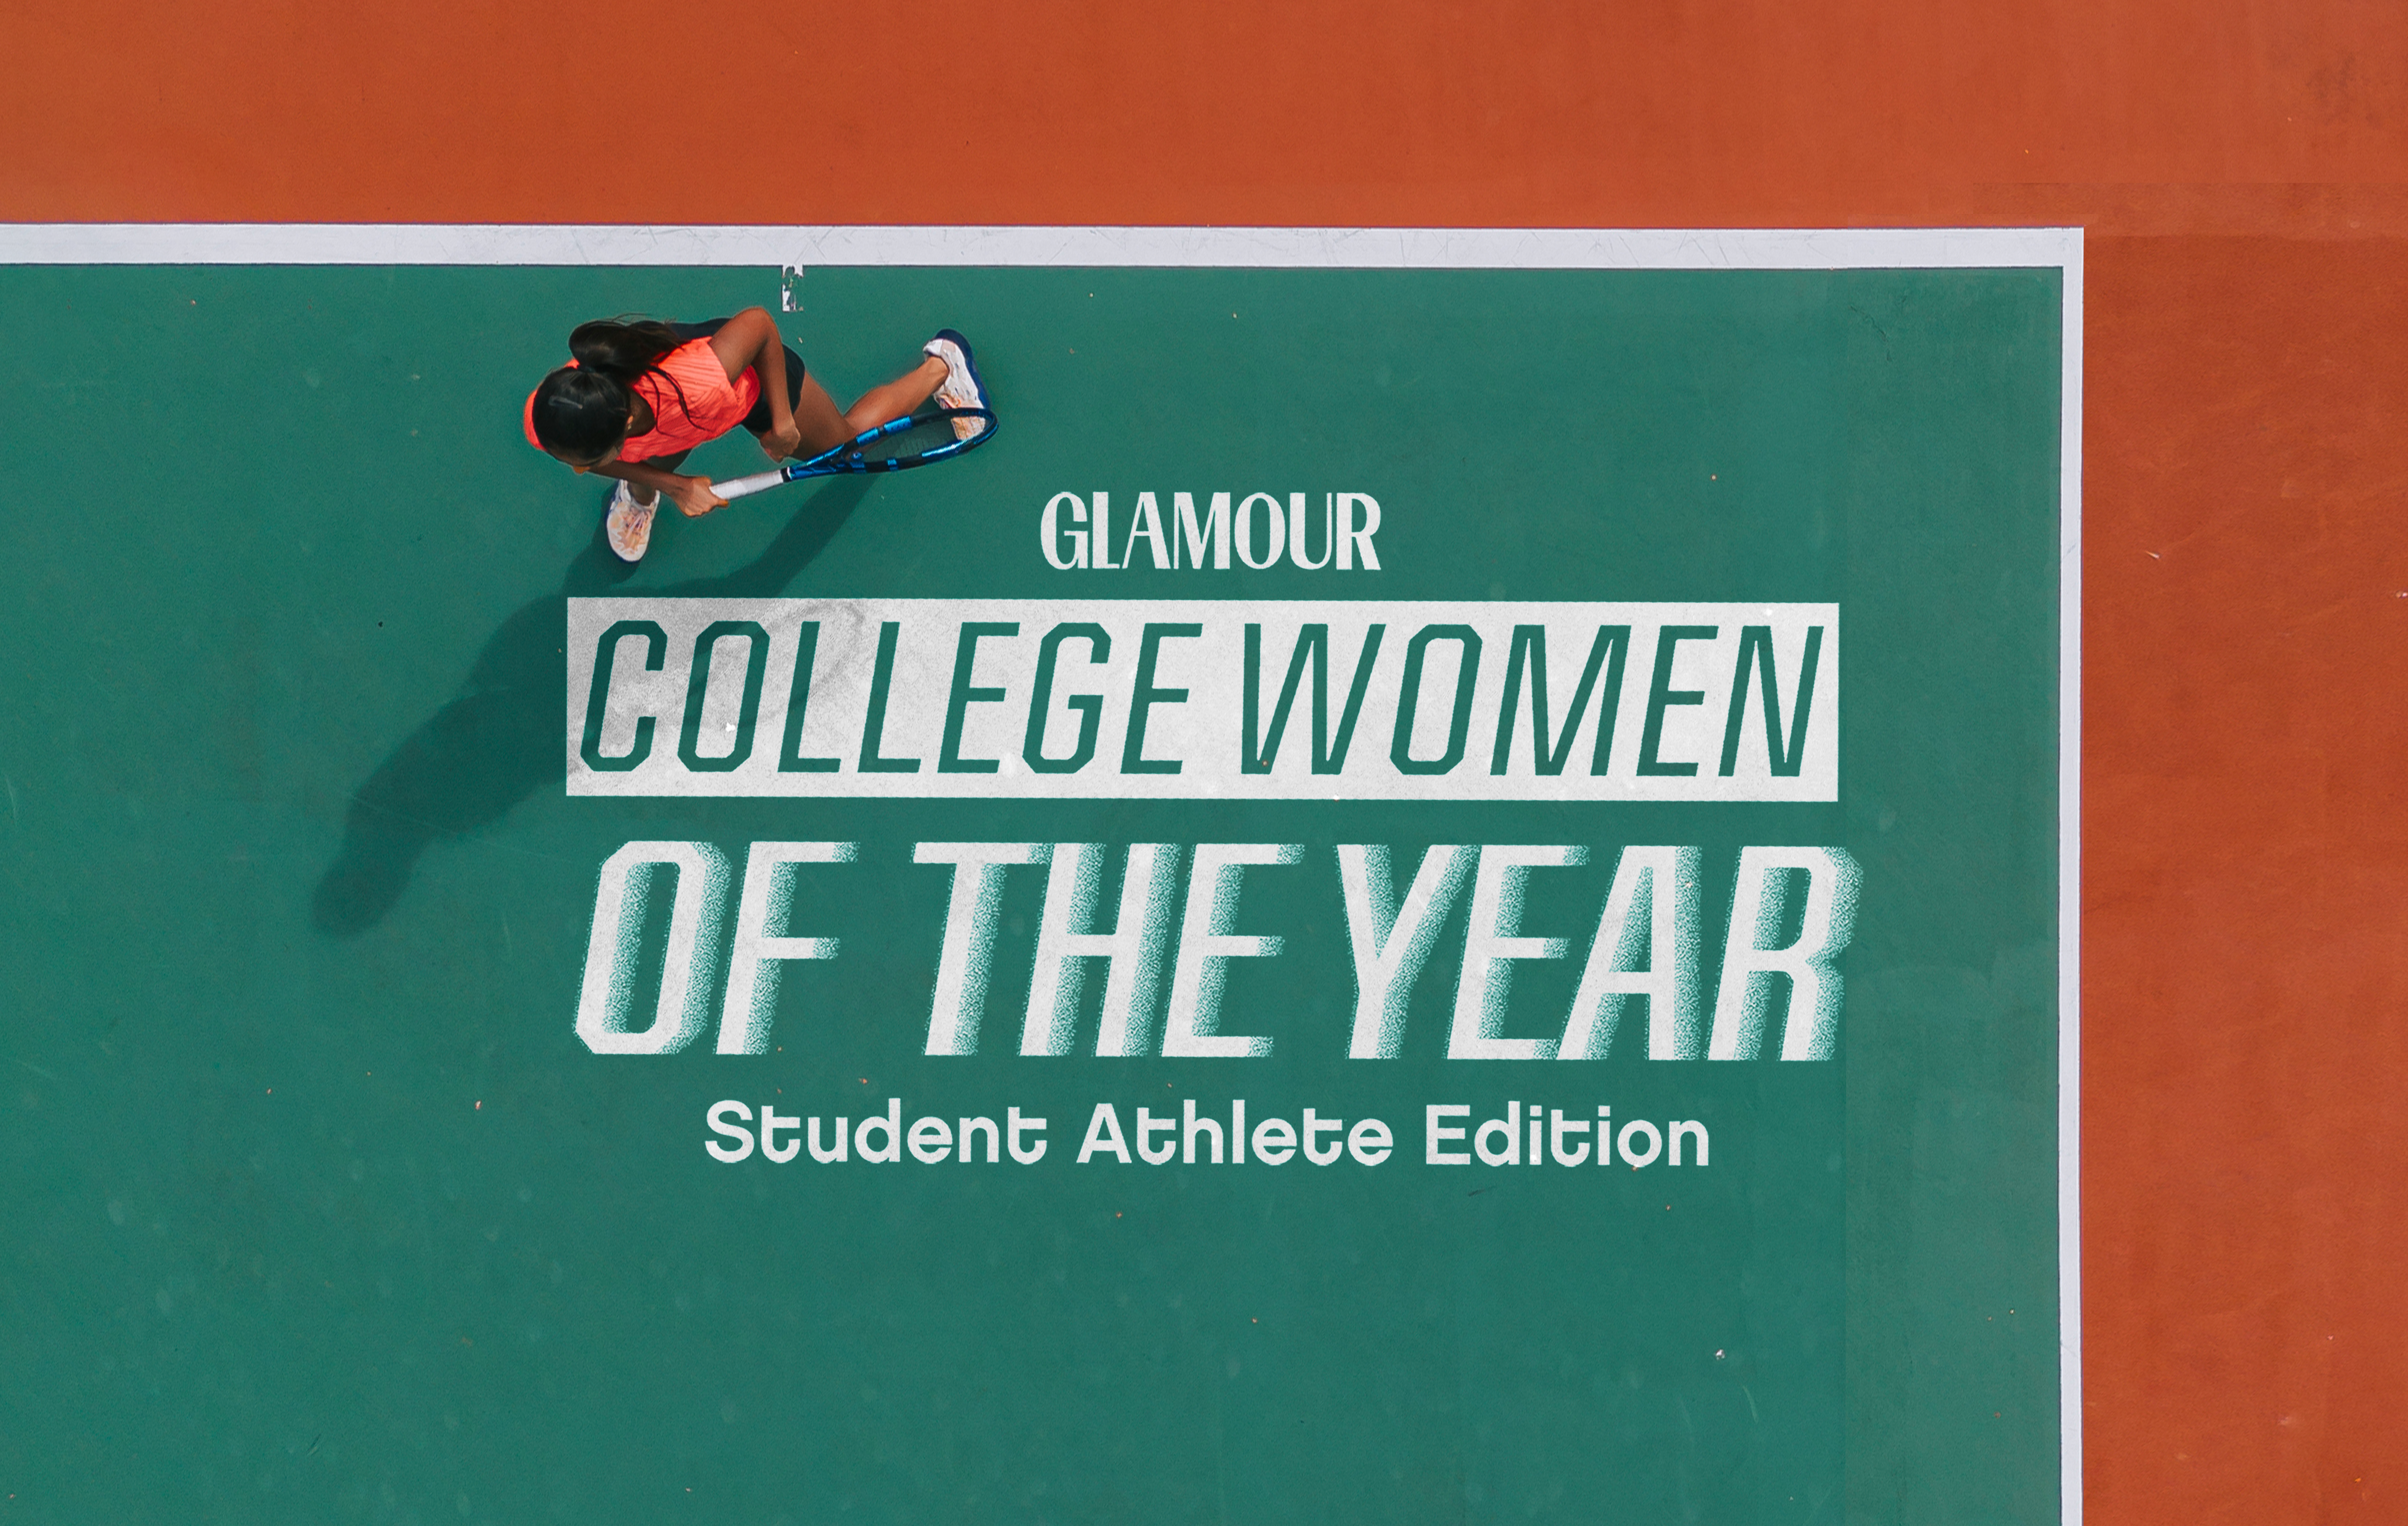 Nominate a Remarkable Athlete for Glamour's College Women of the Year Award